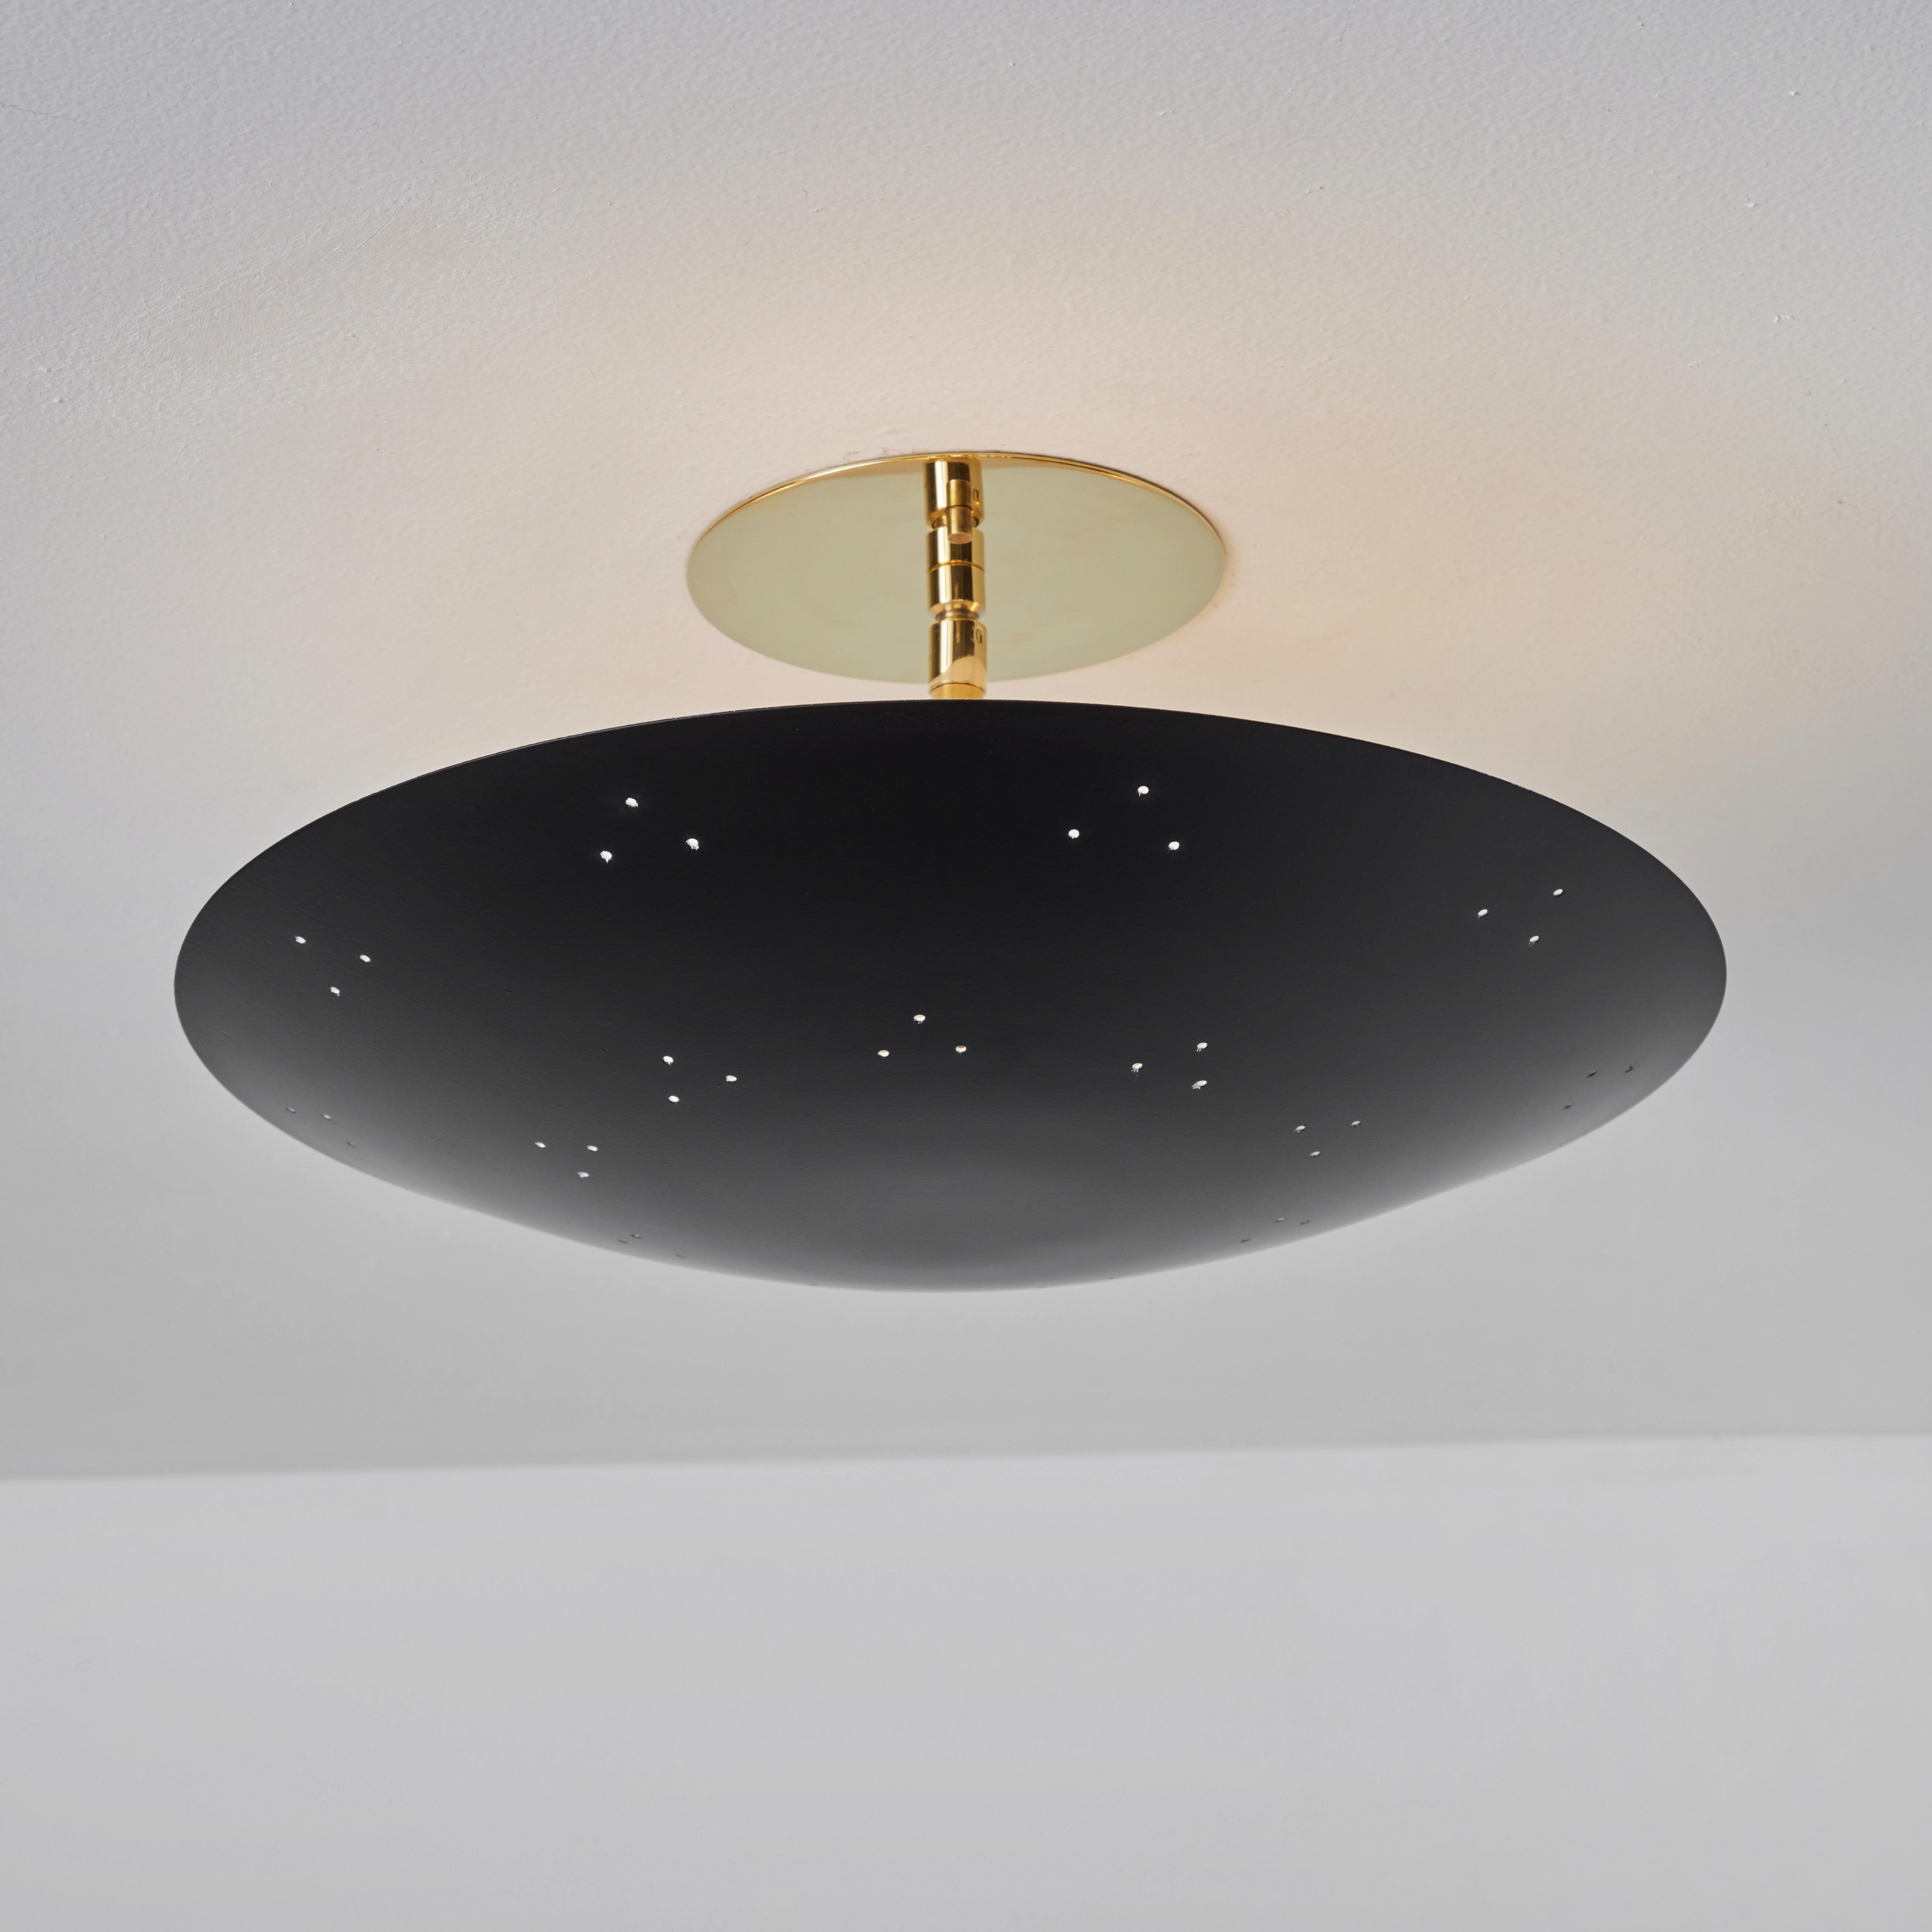 Two Enlighten 'Rey' Perforated Metal Dome Ceiling Lamp in Black For Sale 2